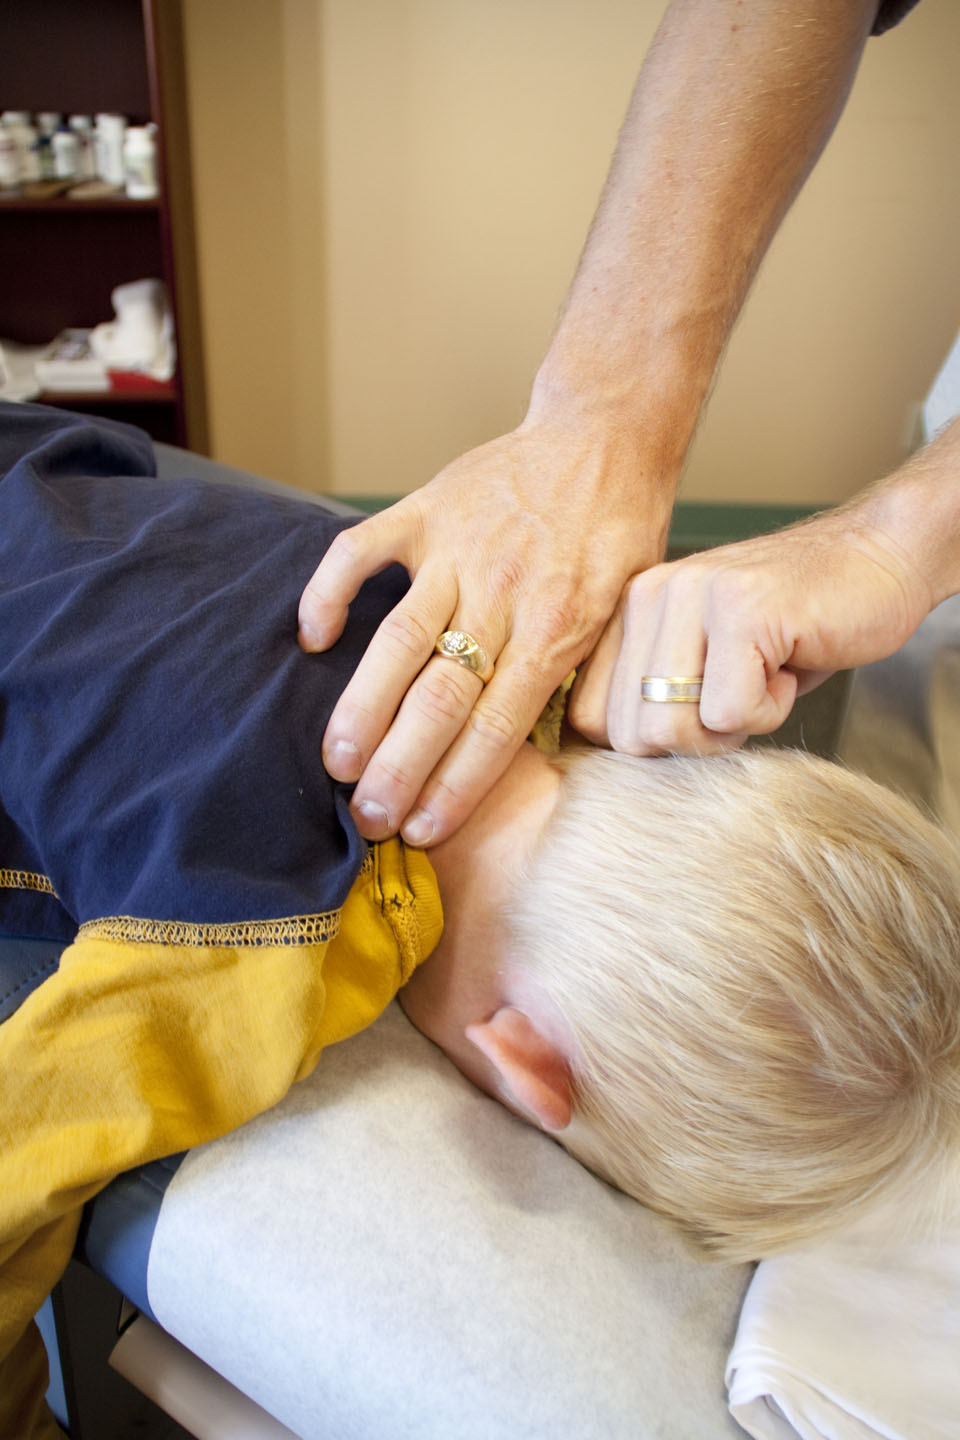 Salt Lake City chiropractor neck and head pain treatment